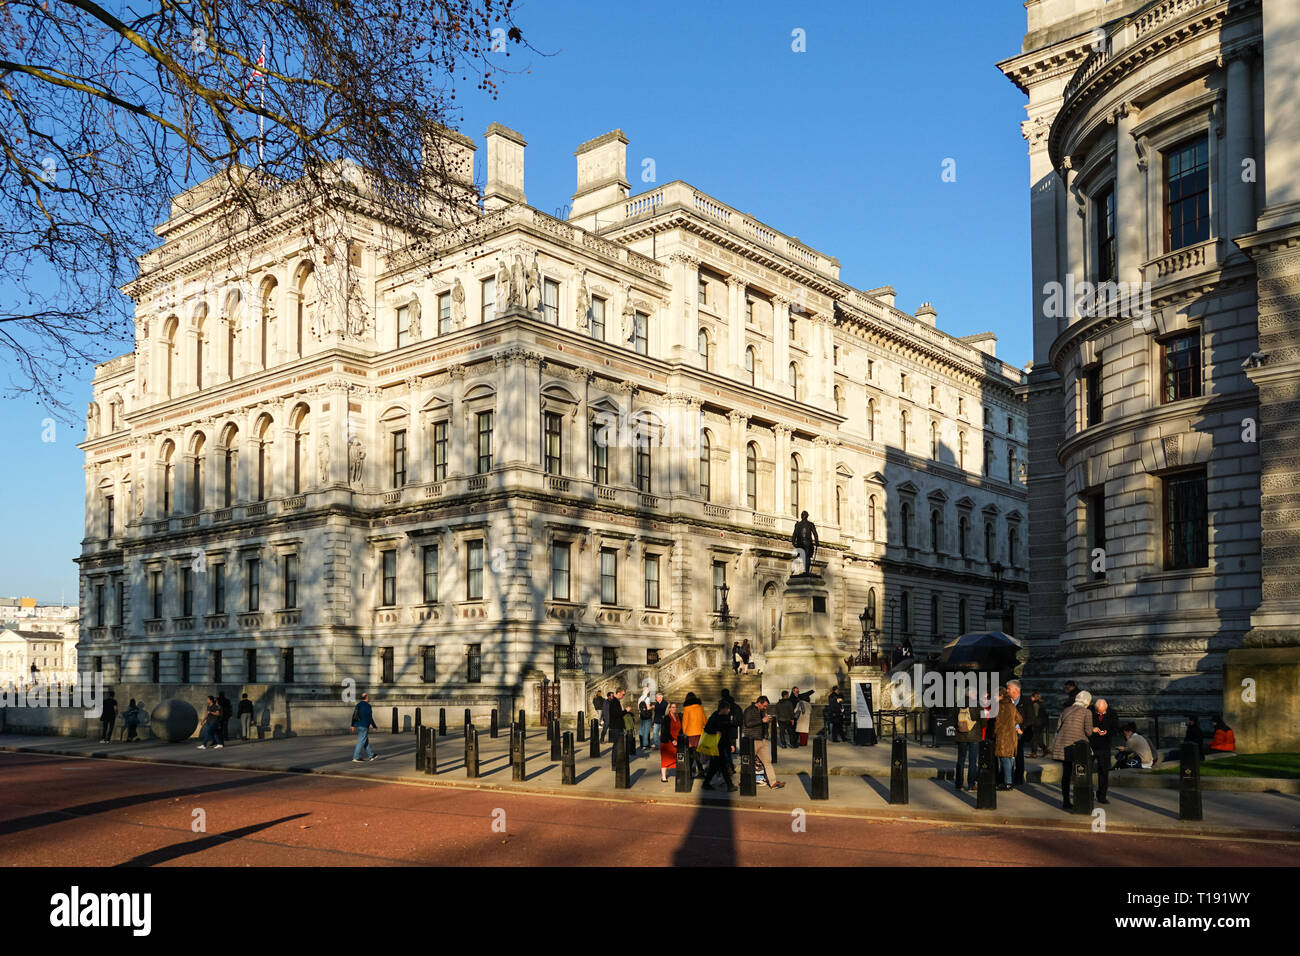 The Foreign and Commonwealth Office in Whitehall with Robert Clive Memorial, London England United Kingdom UK Stock Photo